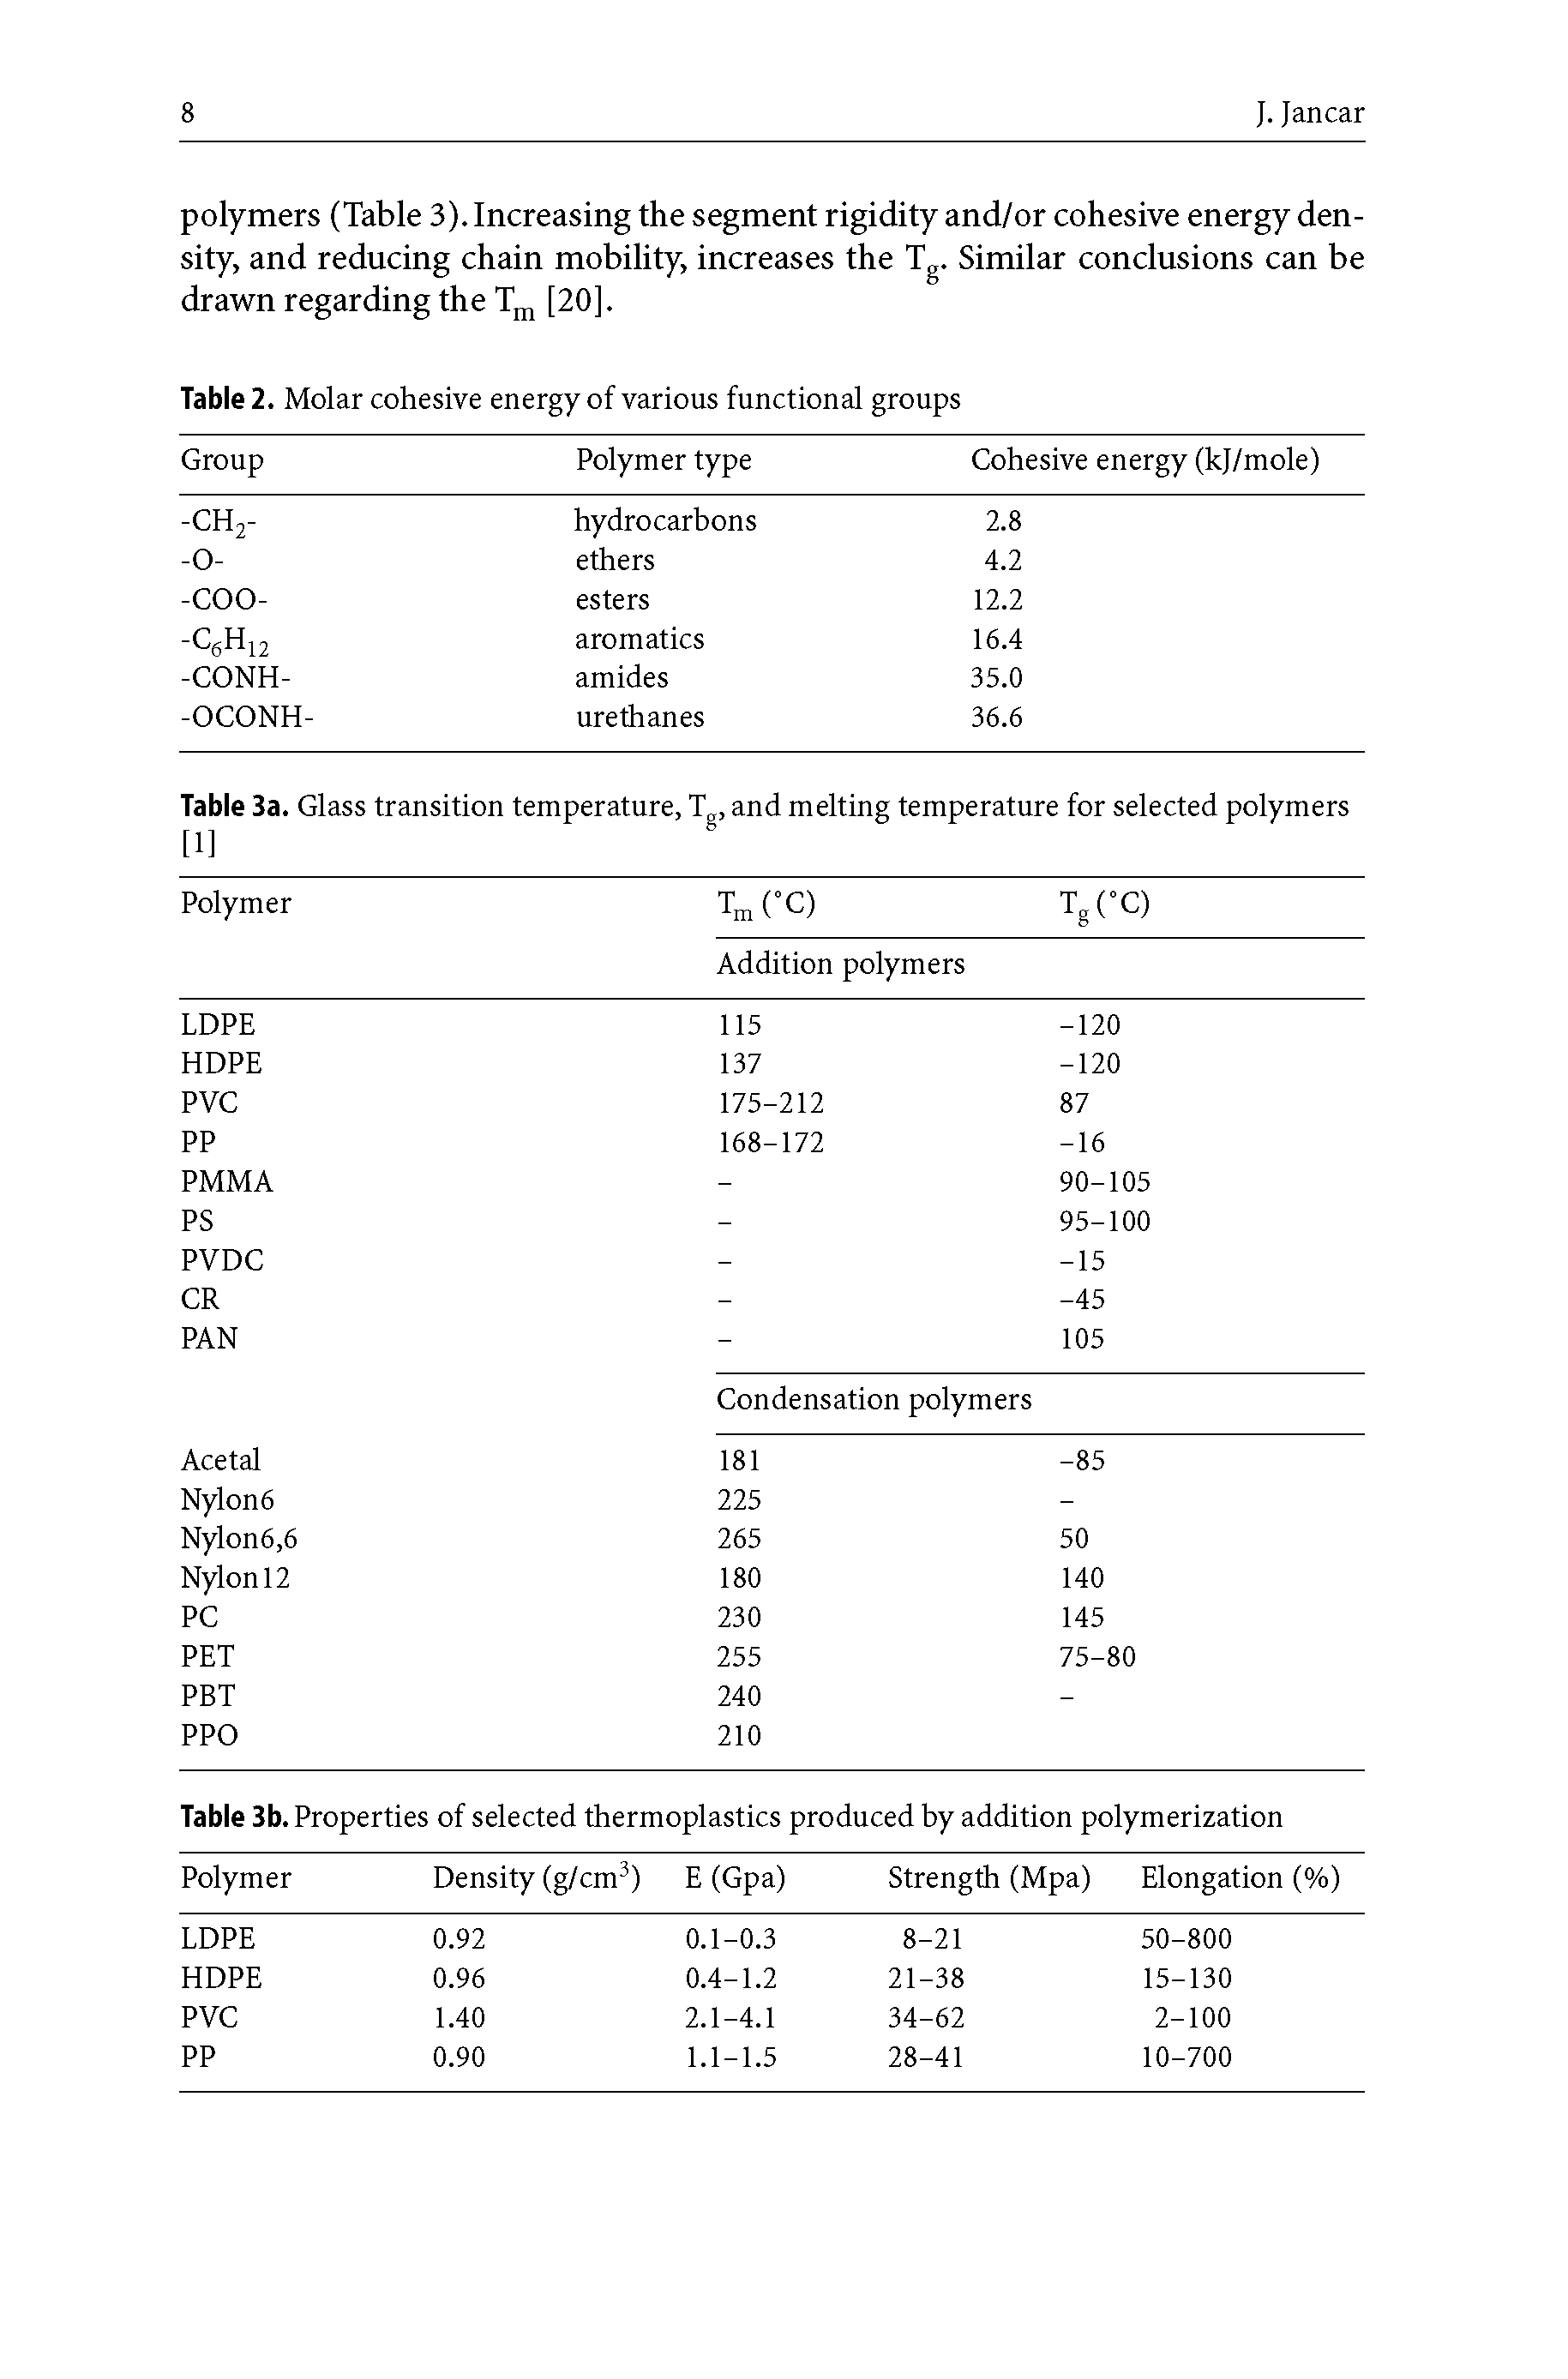 Table 2. Molar cohesive energy of various functional groups...